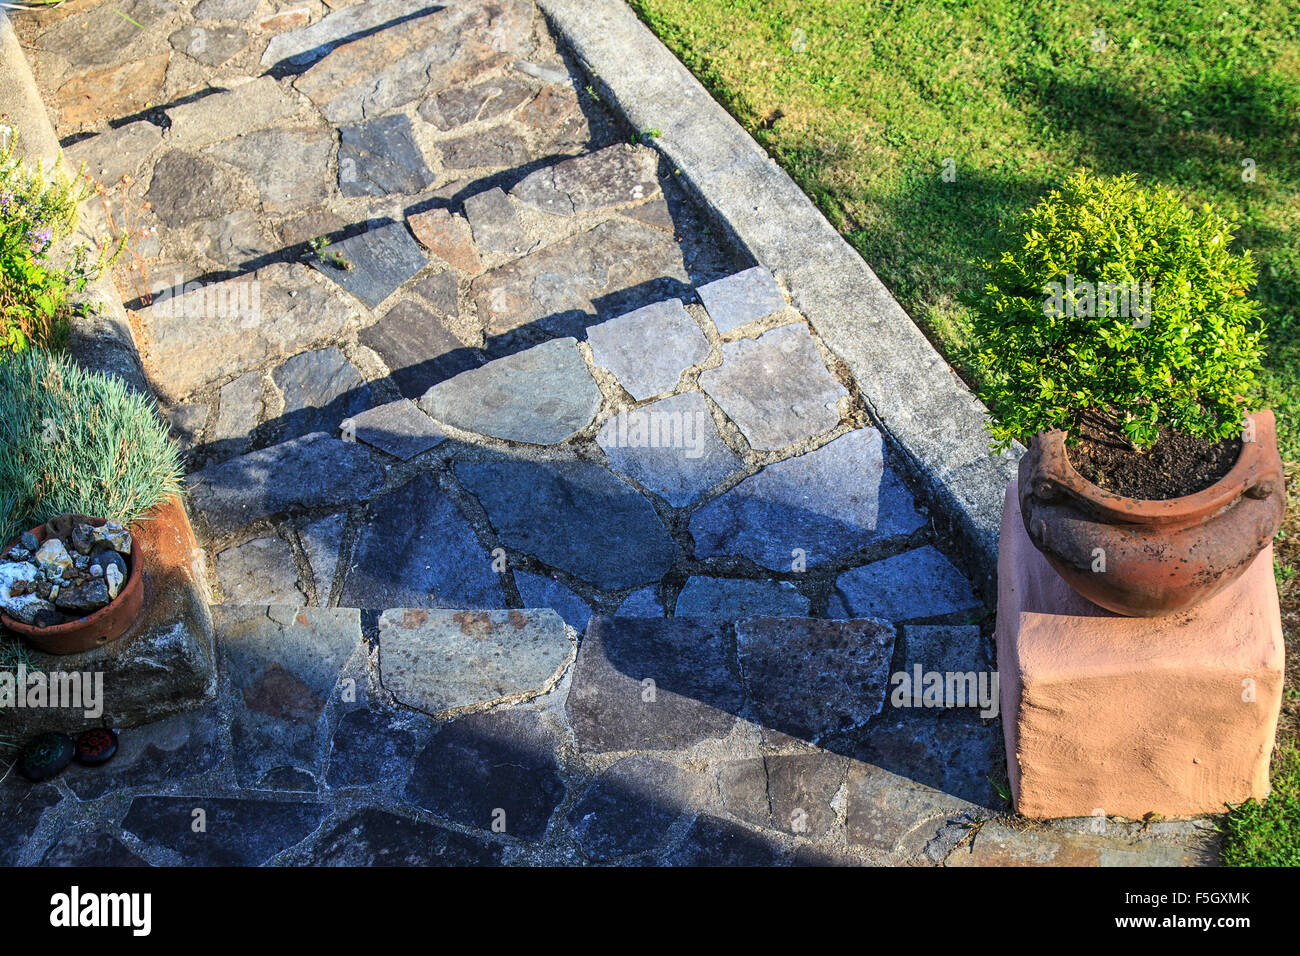 Stone path with plant pots. Crazy paving steps. Stock Photo